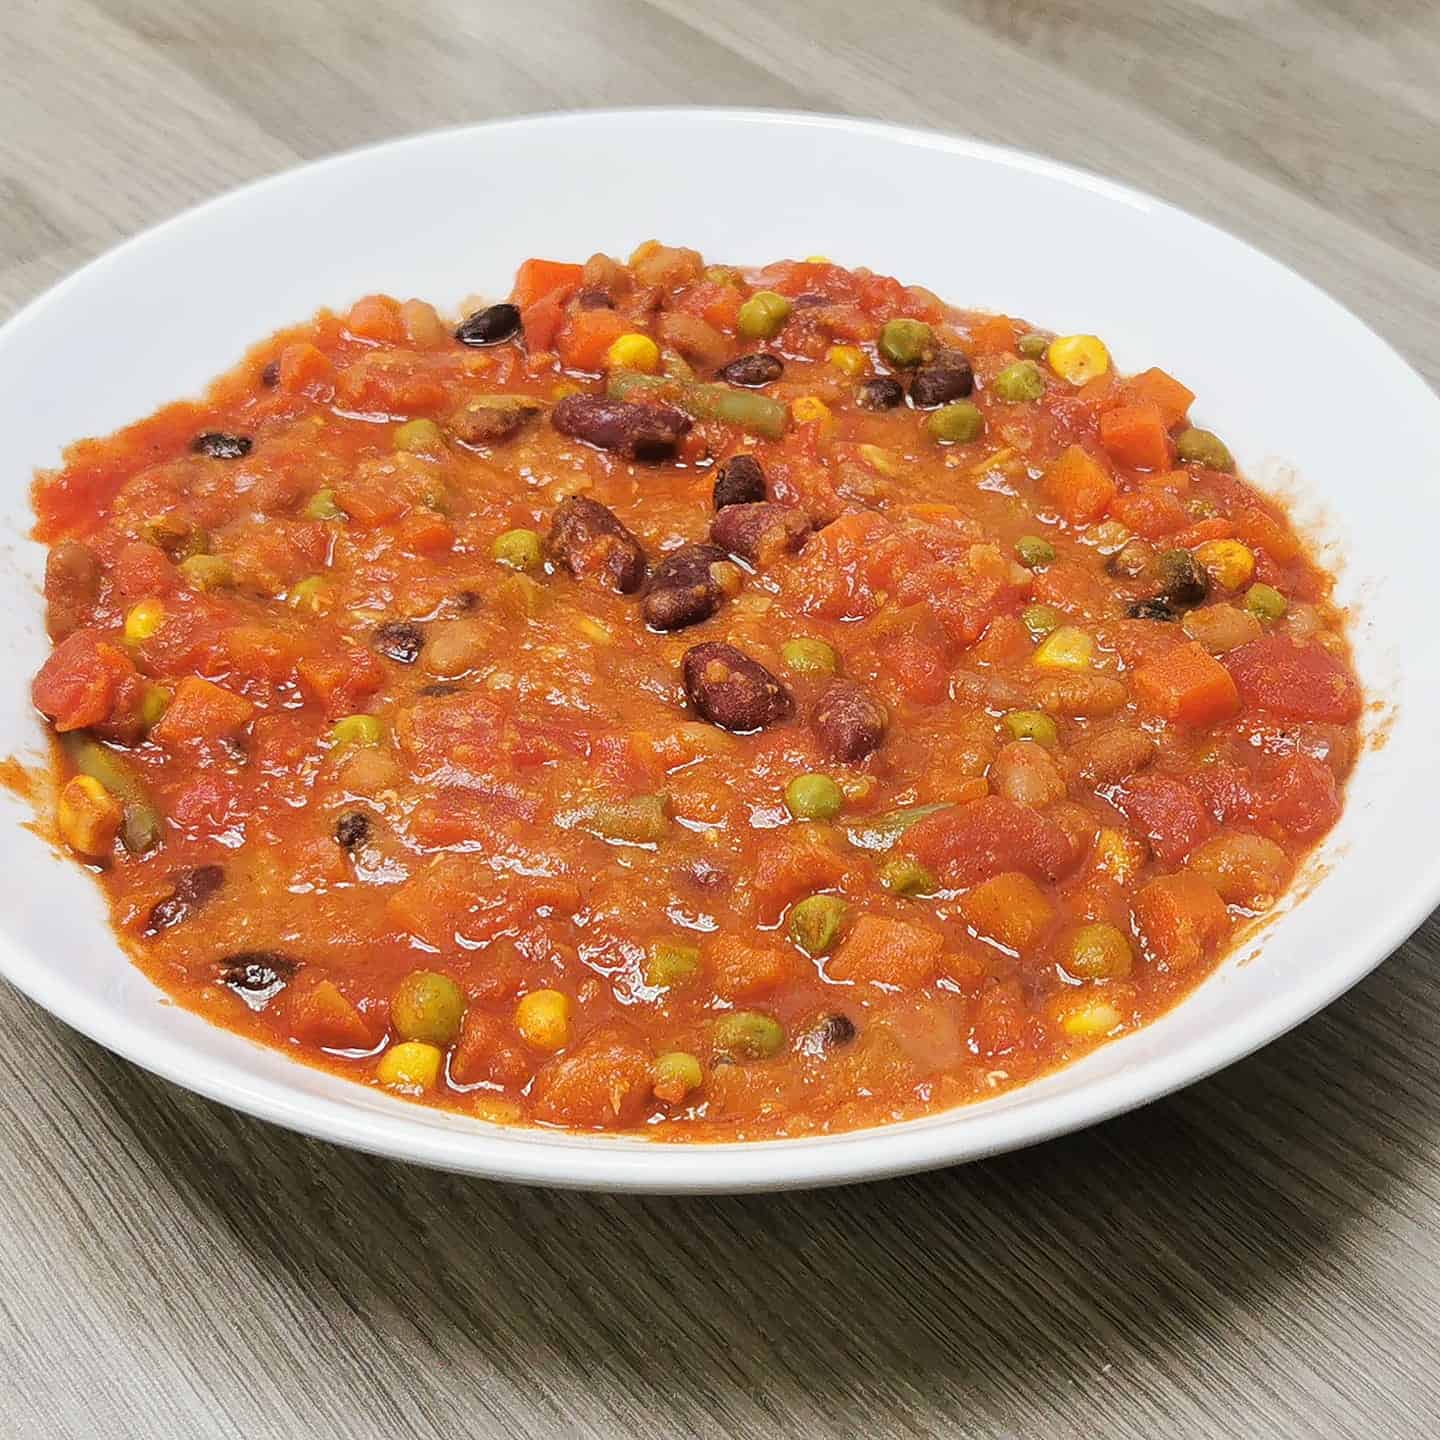 Photo of a bowl of veggie chilli